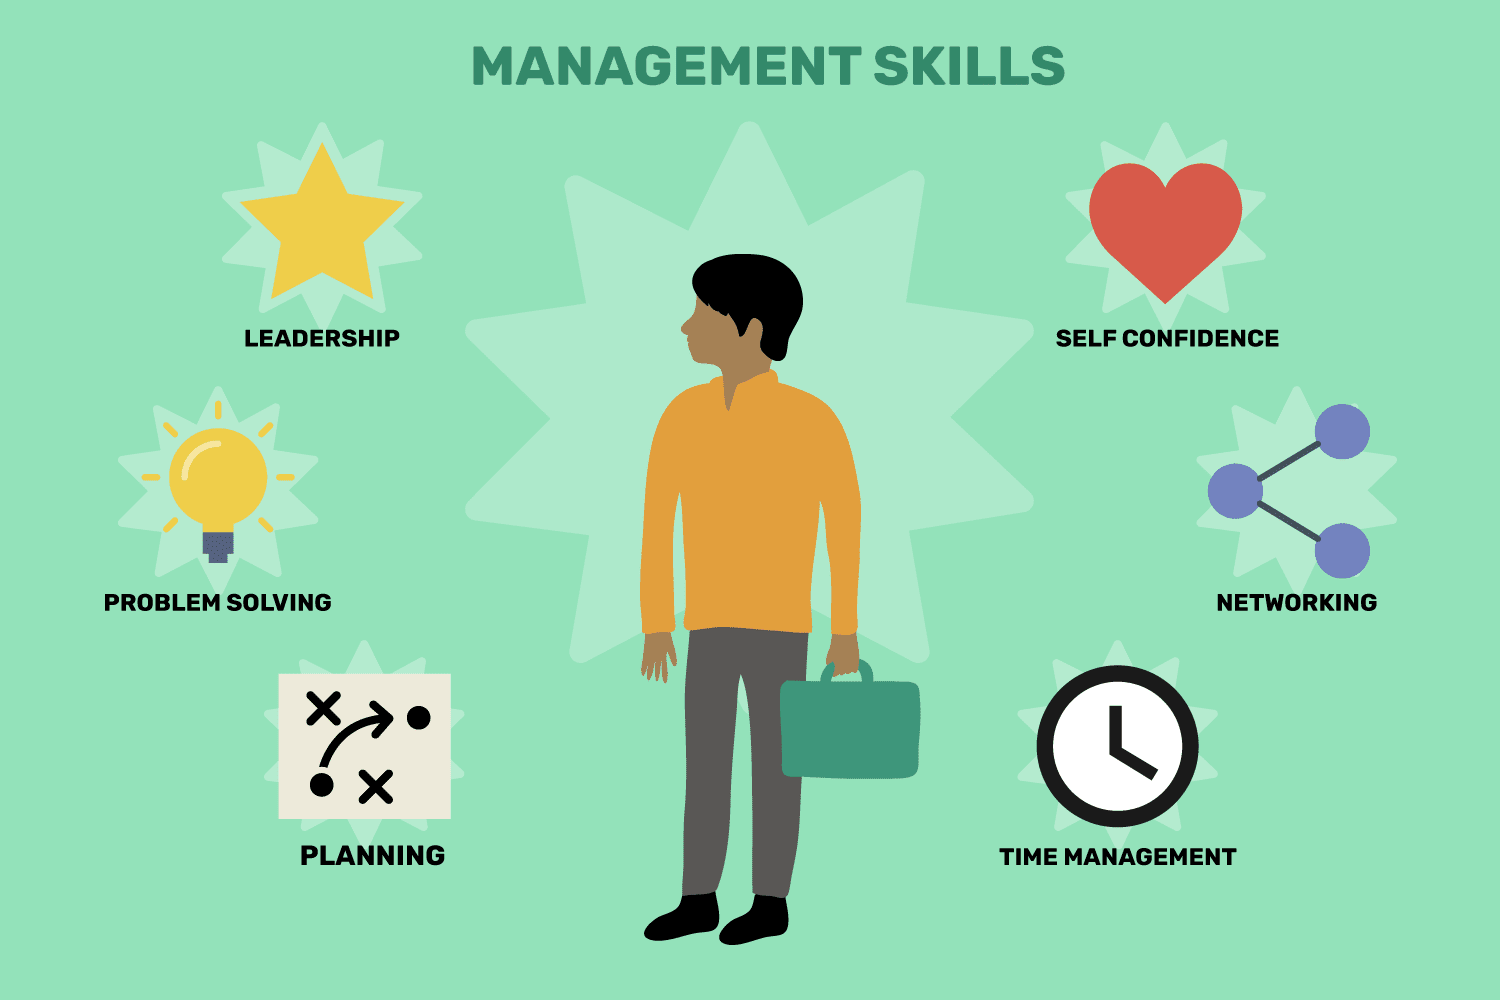 Top Management Skills to Learn